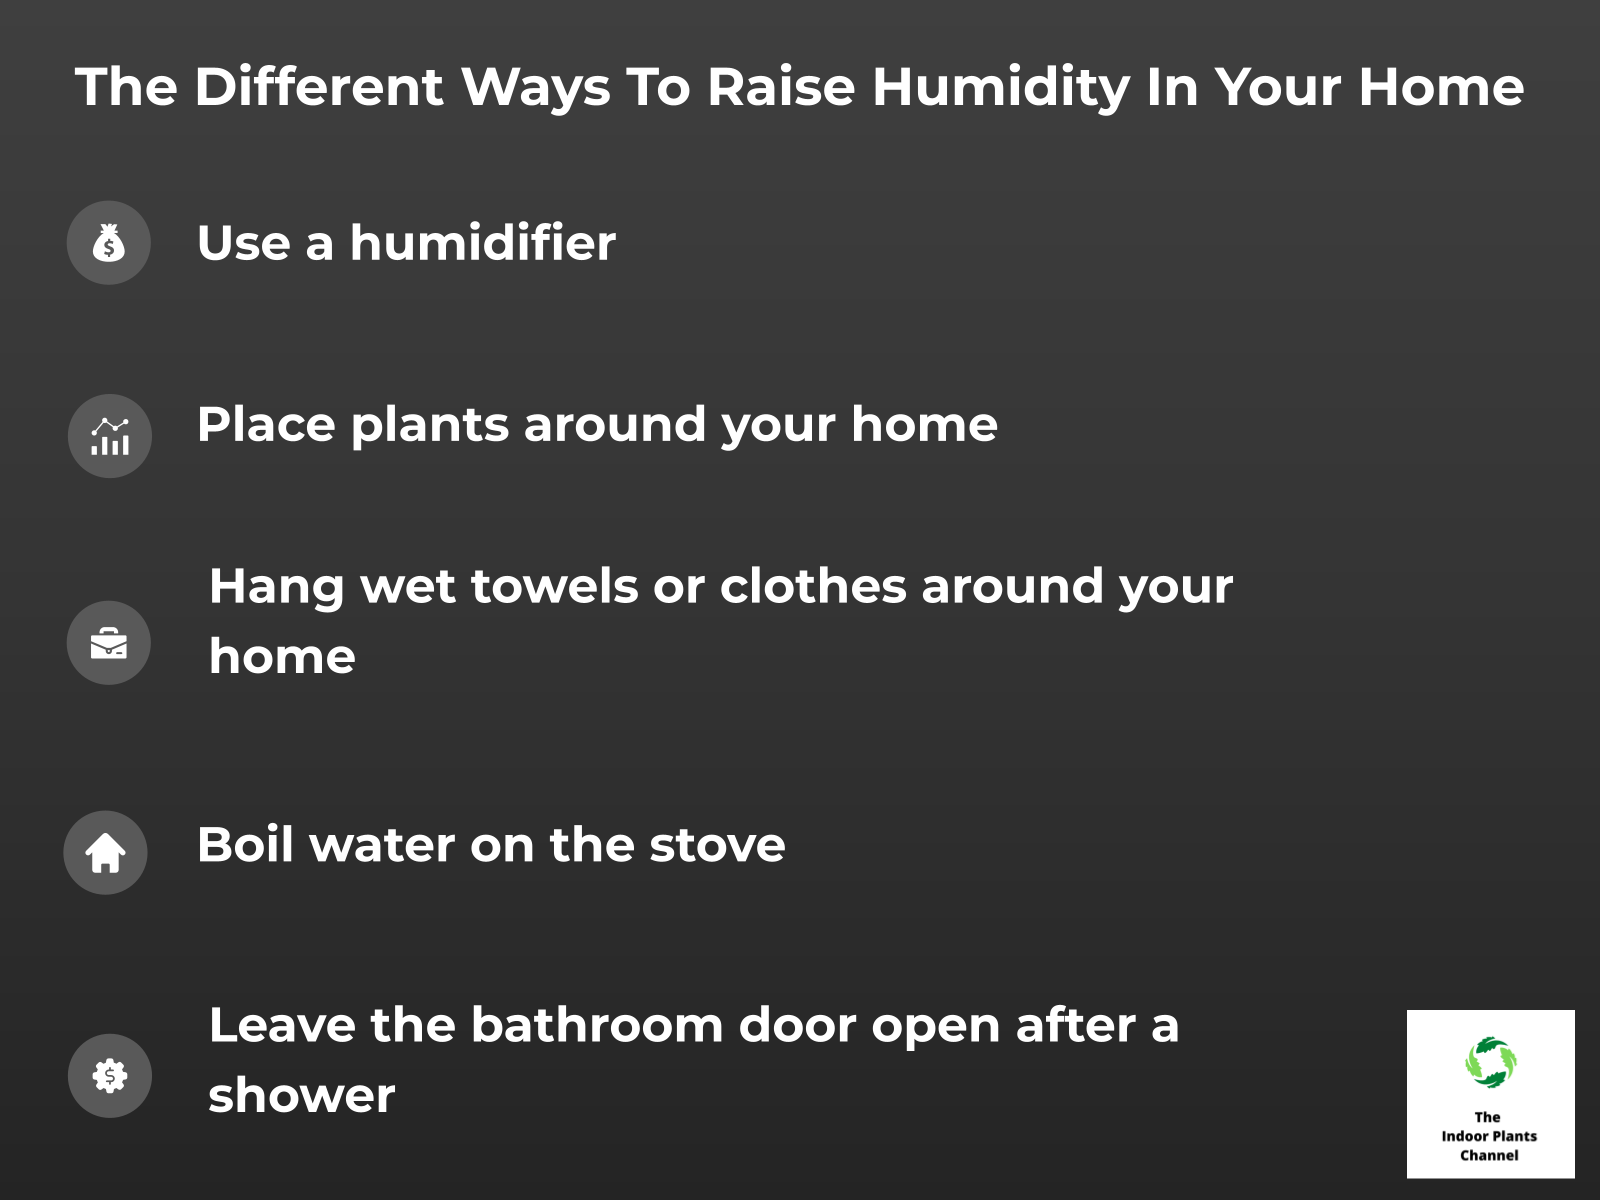 INFOGRAPHIC: The Different Ways to Raise Humidity in Your Home